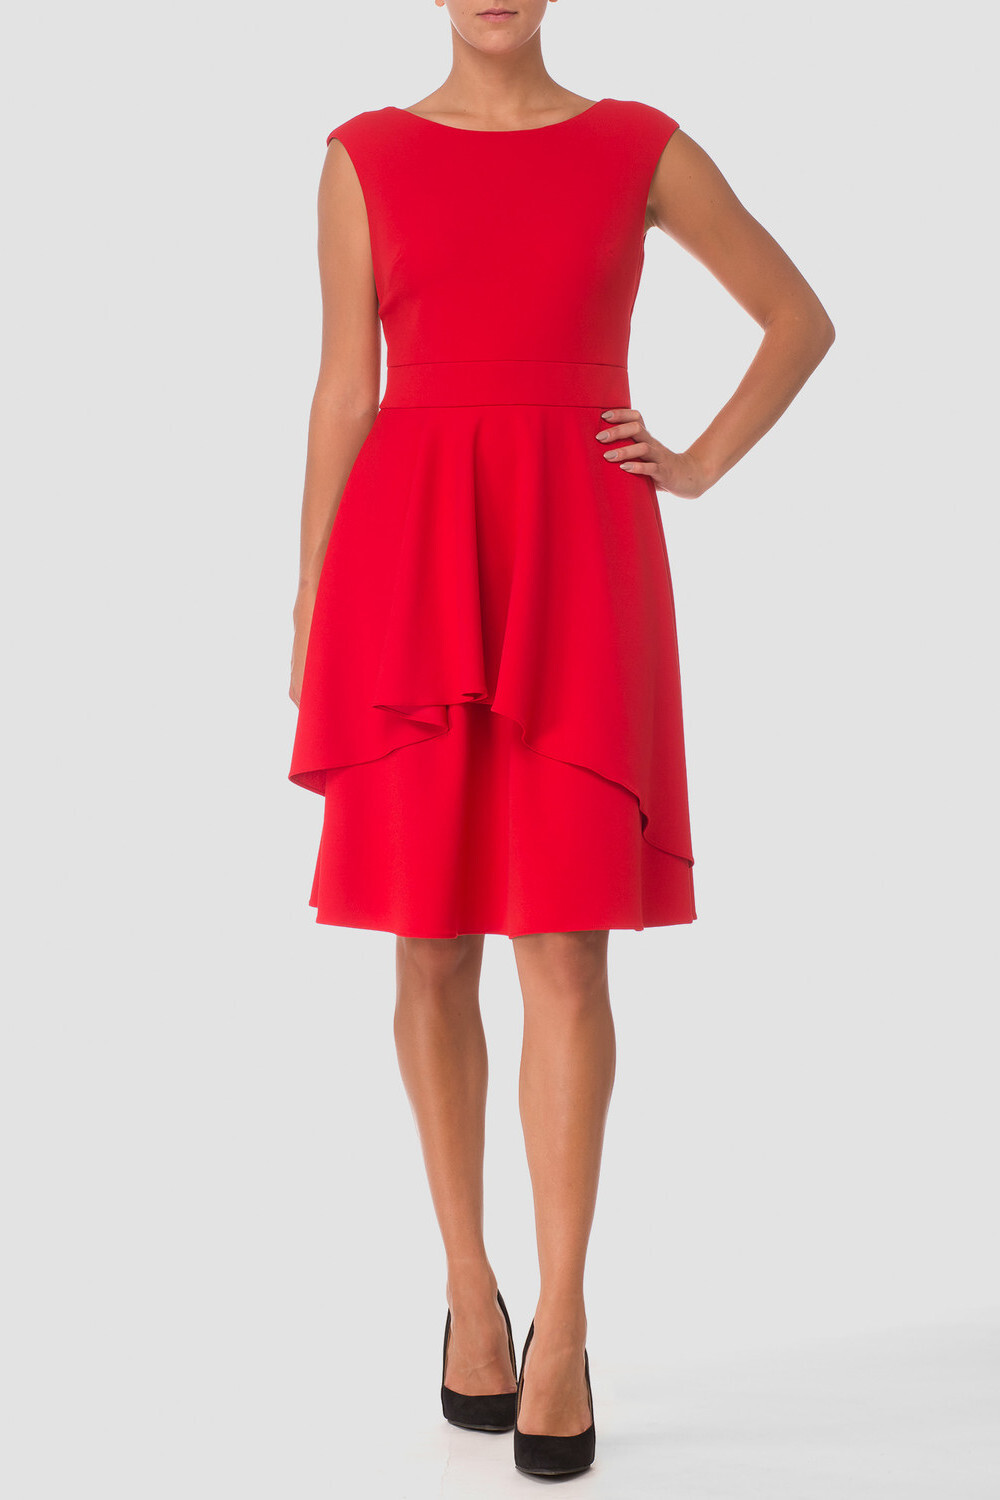 Joseph Ribkoff robe style 173409. Rouge A Levres 173